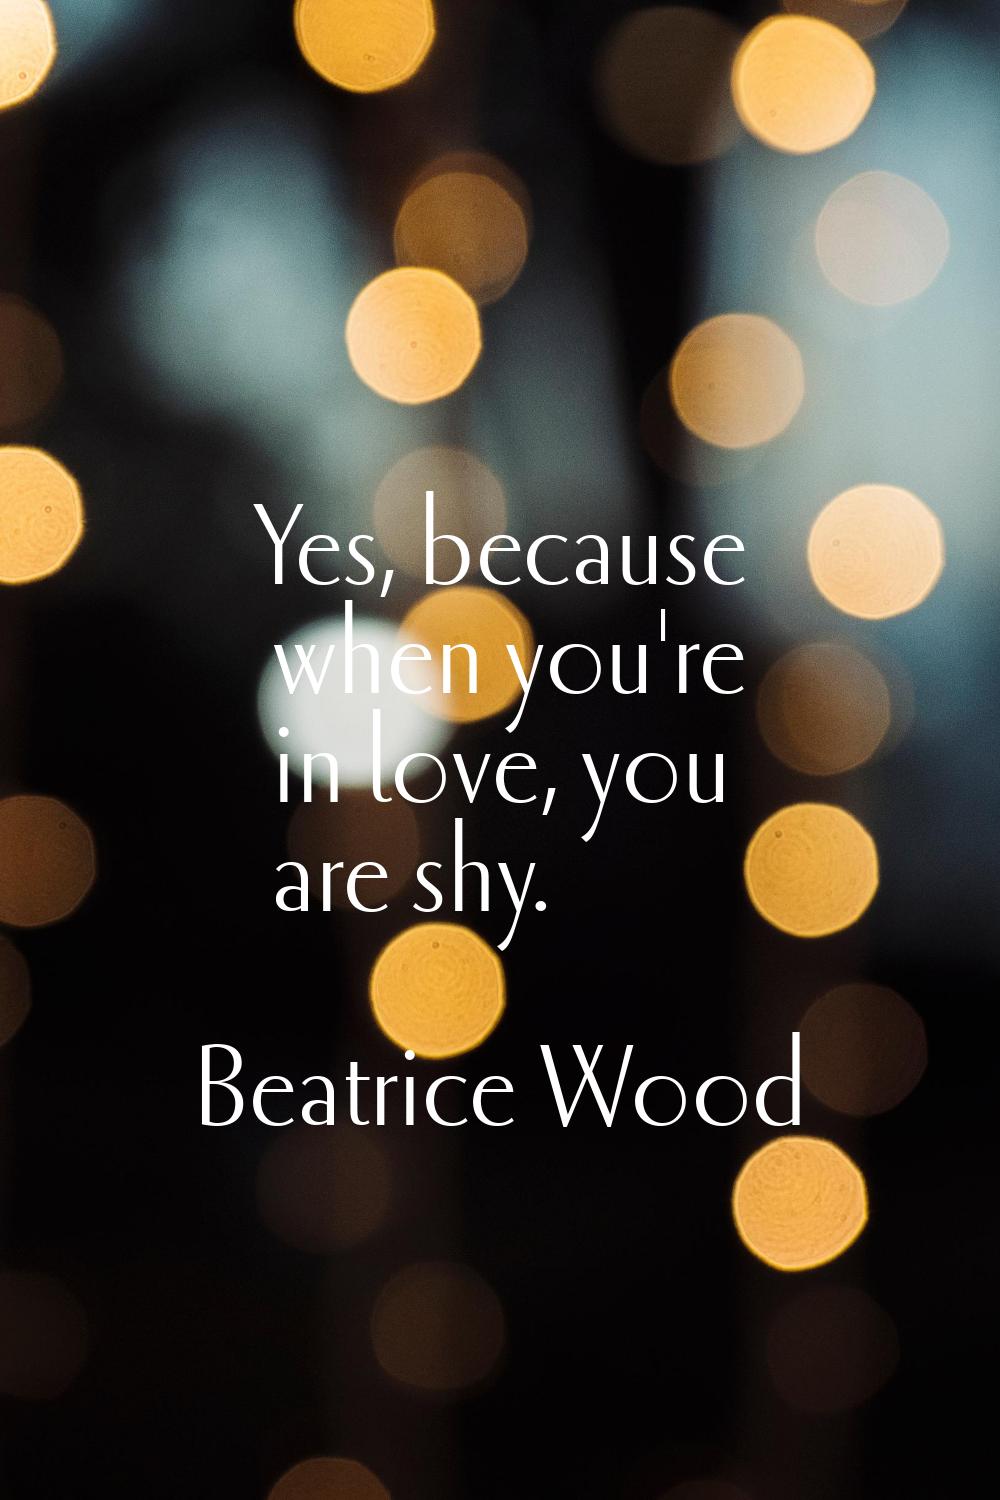 Yes, because when you're in love, you are shy.